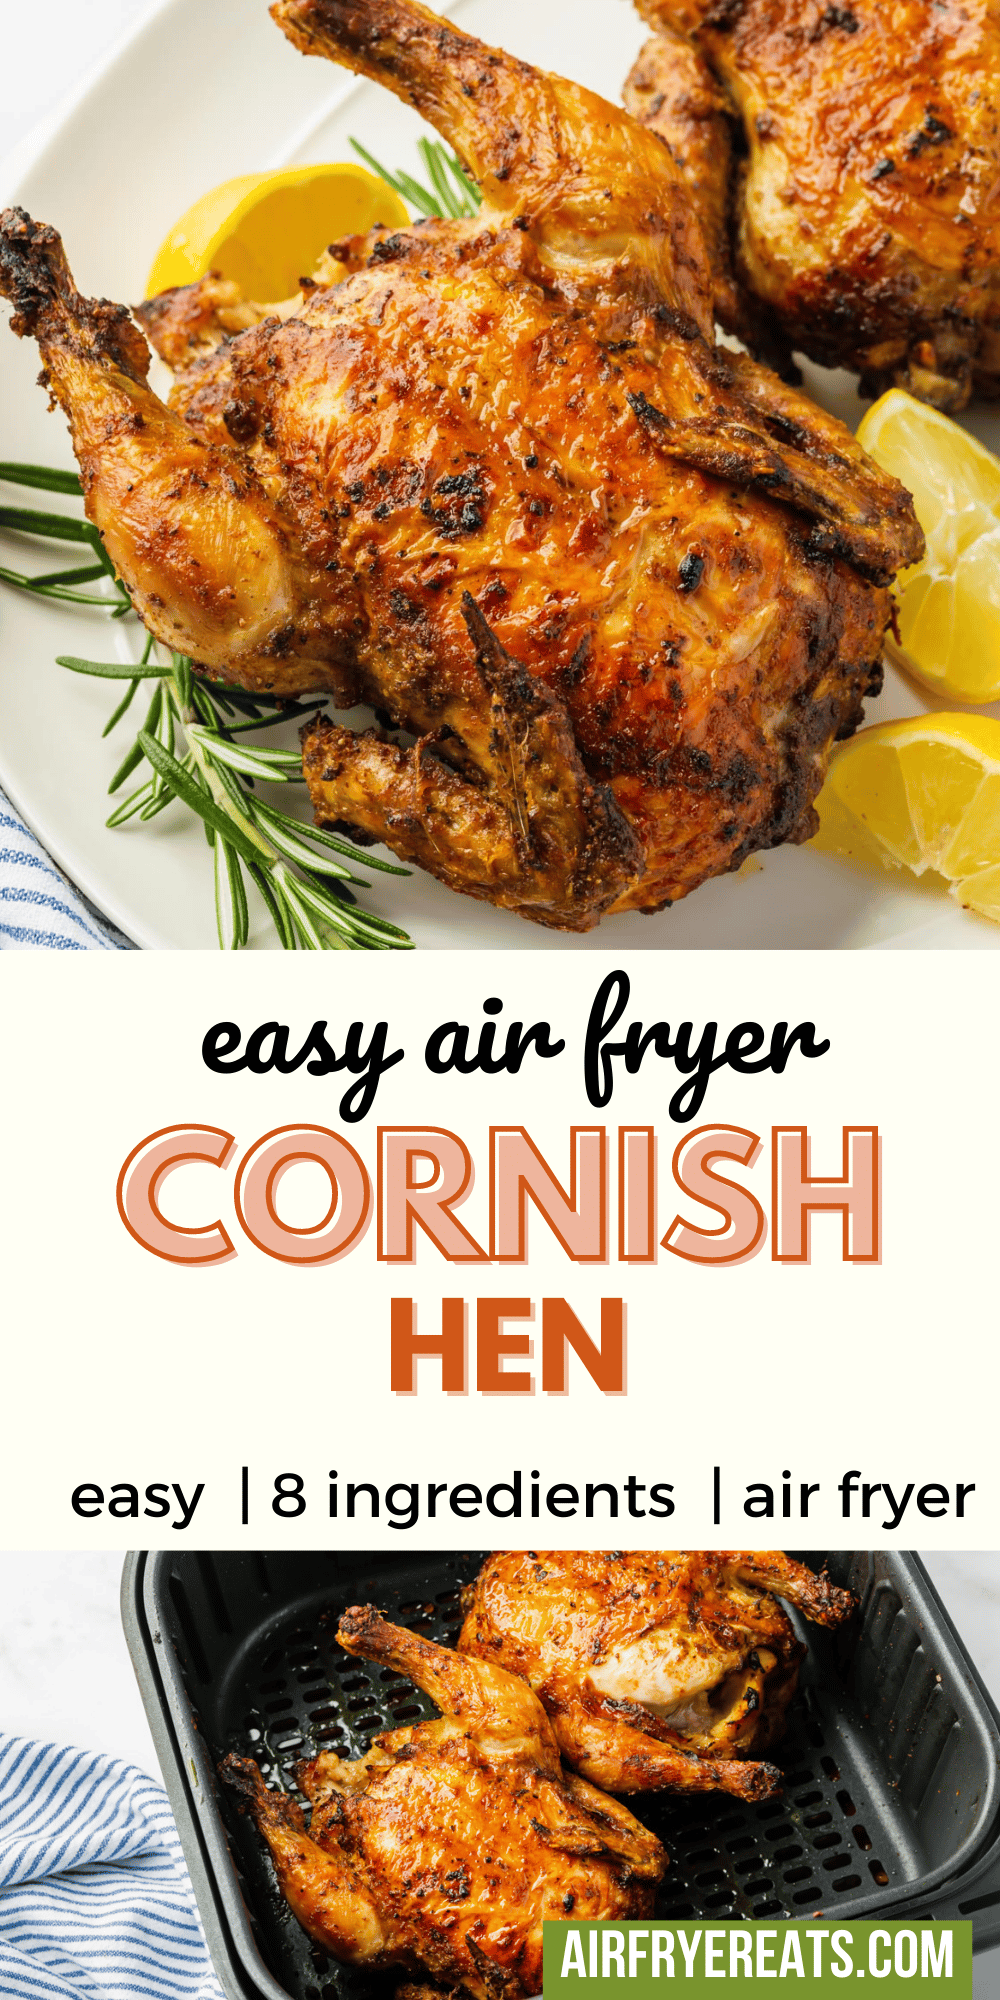 You can cook cornish hen in the air fryer! Your air fryer cornish hen will have crispy skin and the most tender, juicy meat, with very little fuss. via @vegetarianmamma